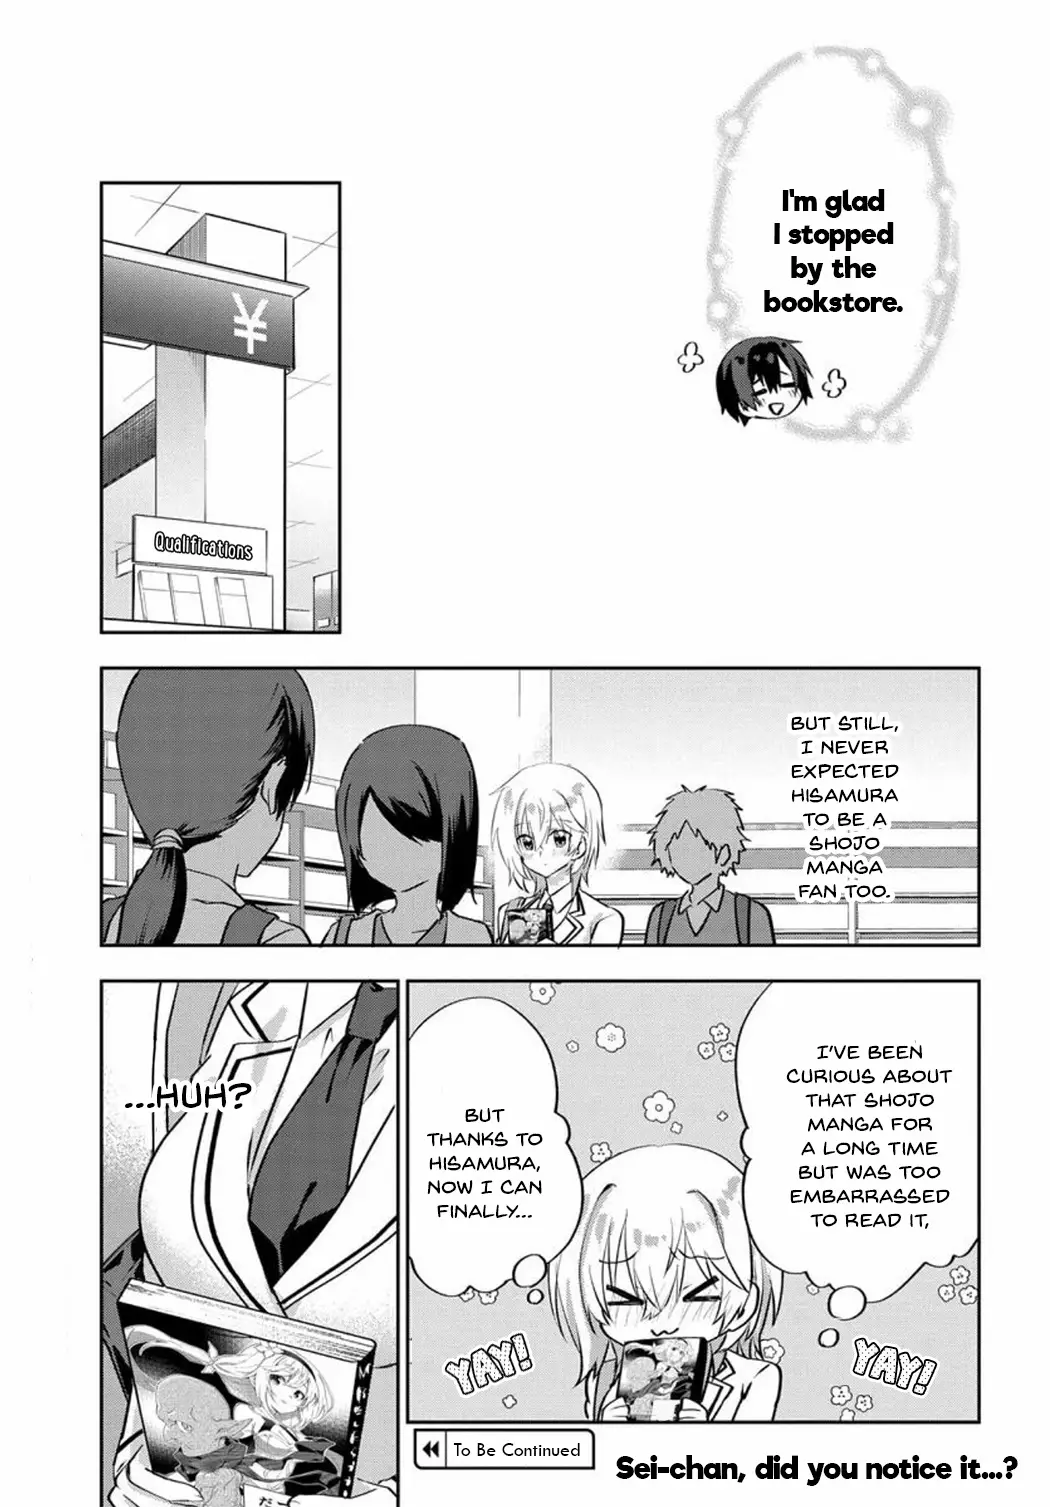 Since I’Ve Entered The World Of Romantic Comedy Manga, I’Ll Do My Best To Make The Losing Heroine Happy - 5.1 page 11-4fdd087e